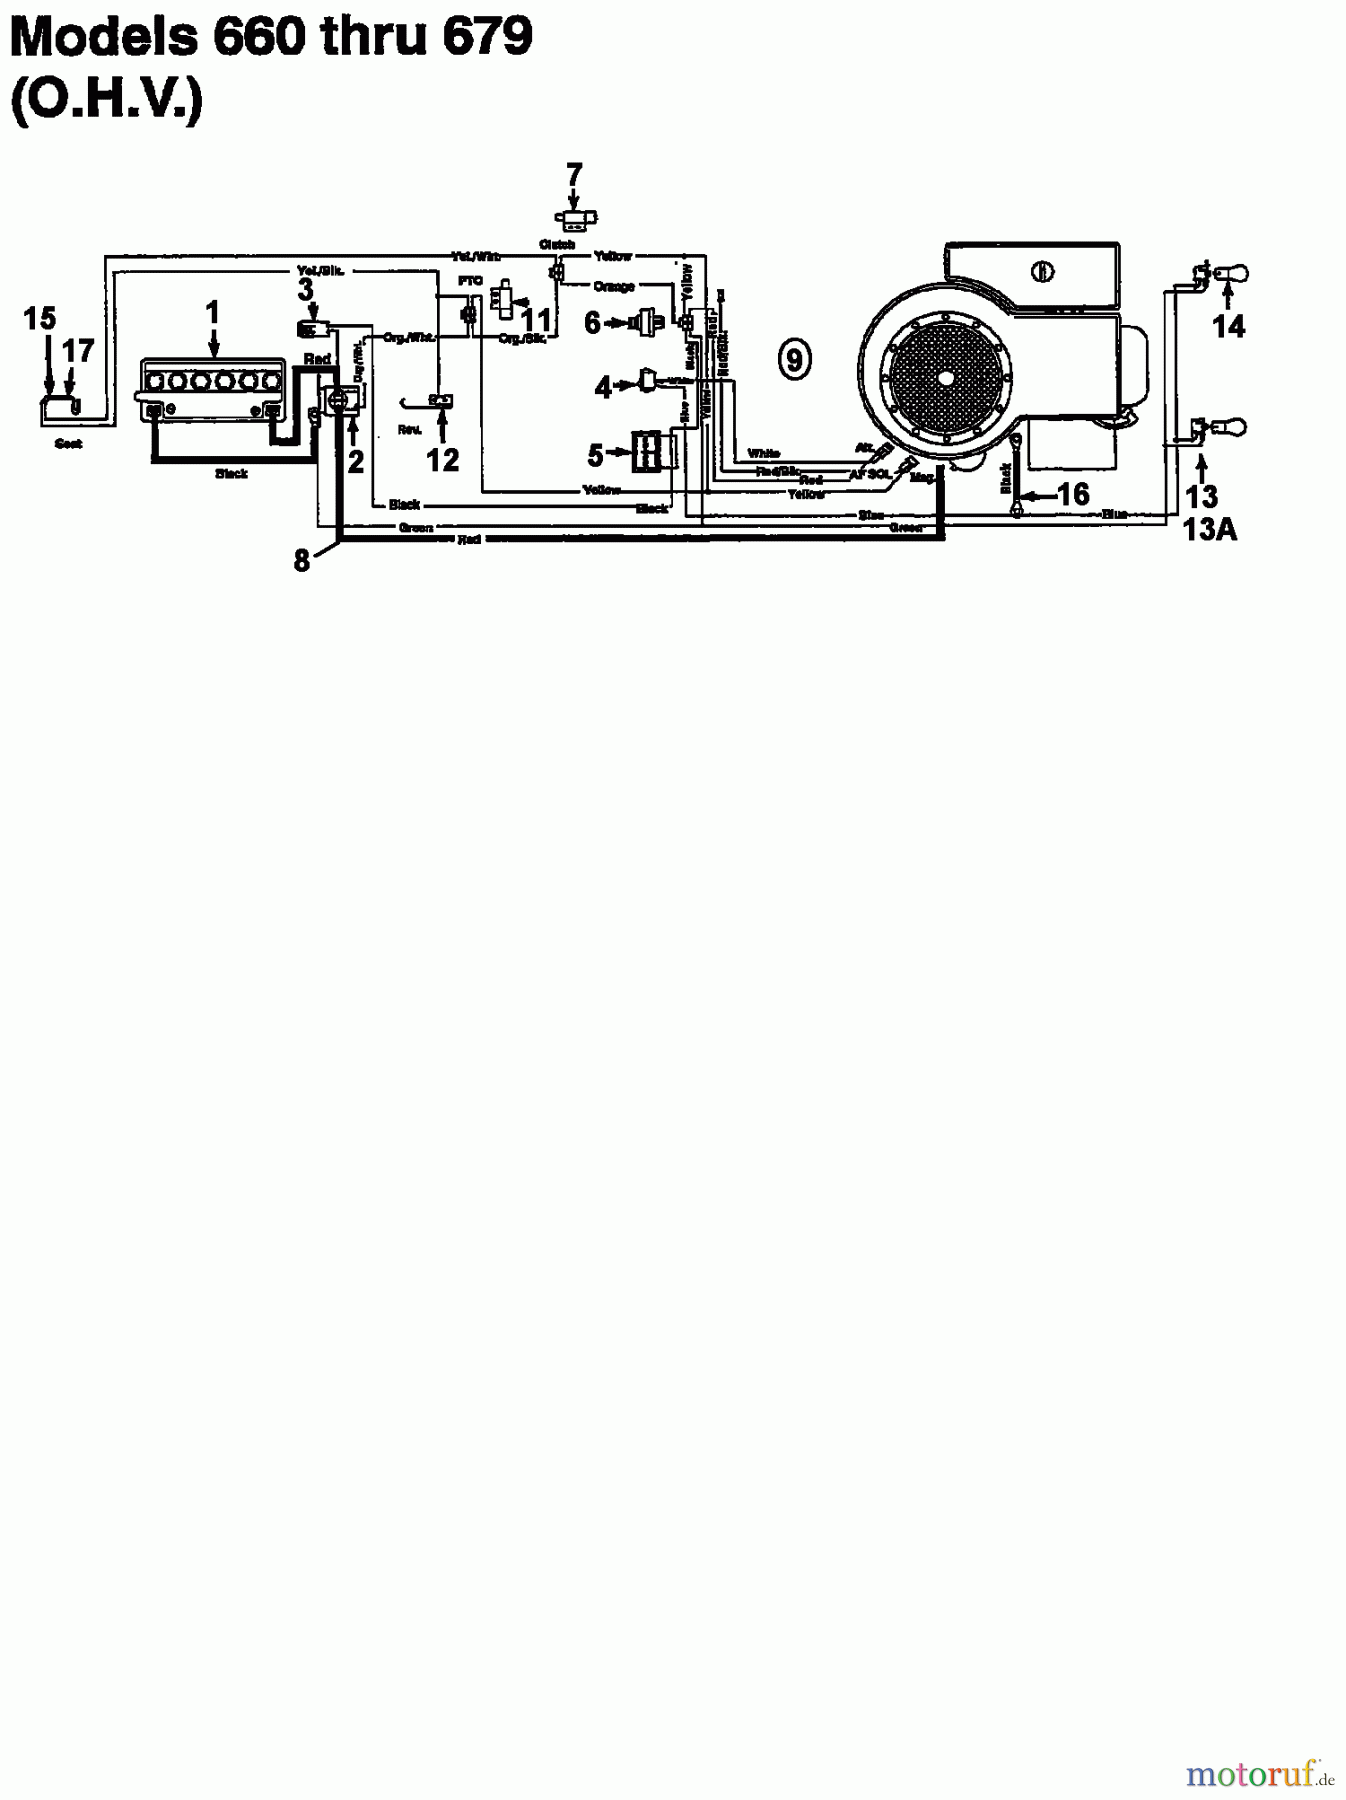  Columbia Lawn tractors 114/107 N 133S619G626  (1993) Wiring diagram for O.H.V.